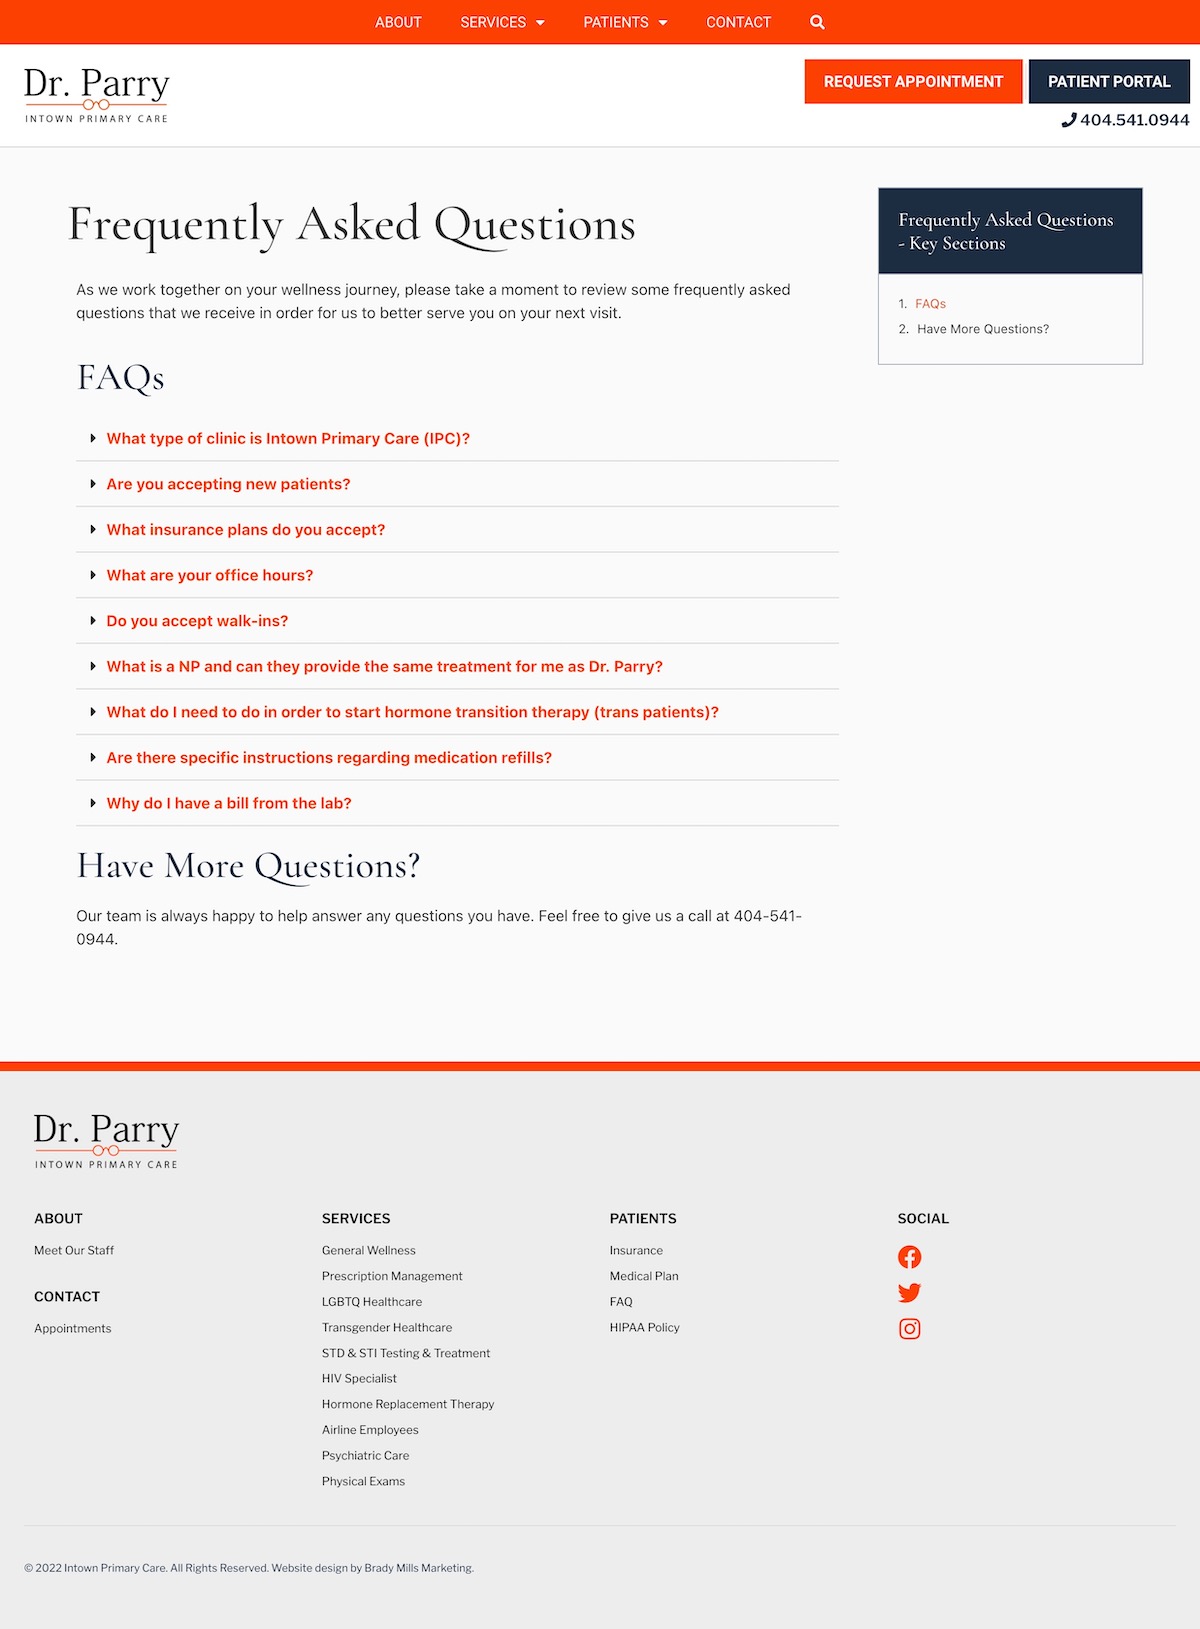 Dr. Scott Parry Atlanta Website Design - Frequently Asked Questions